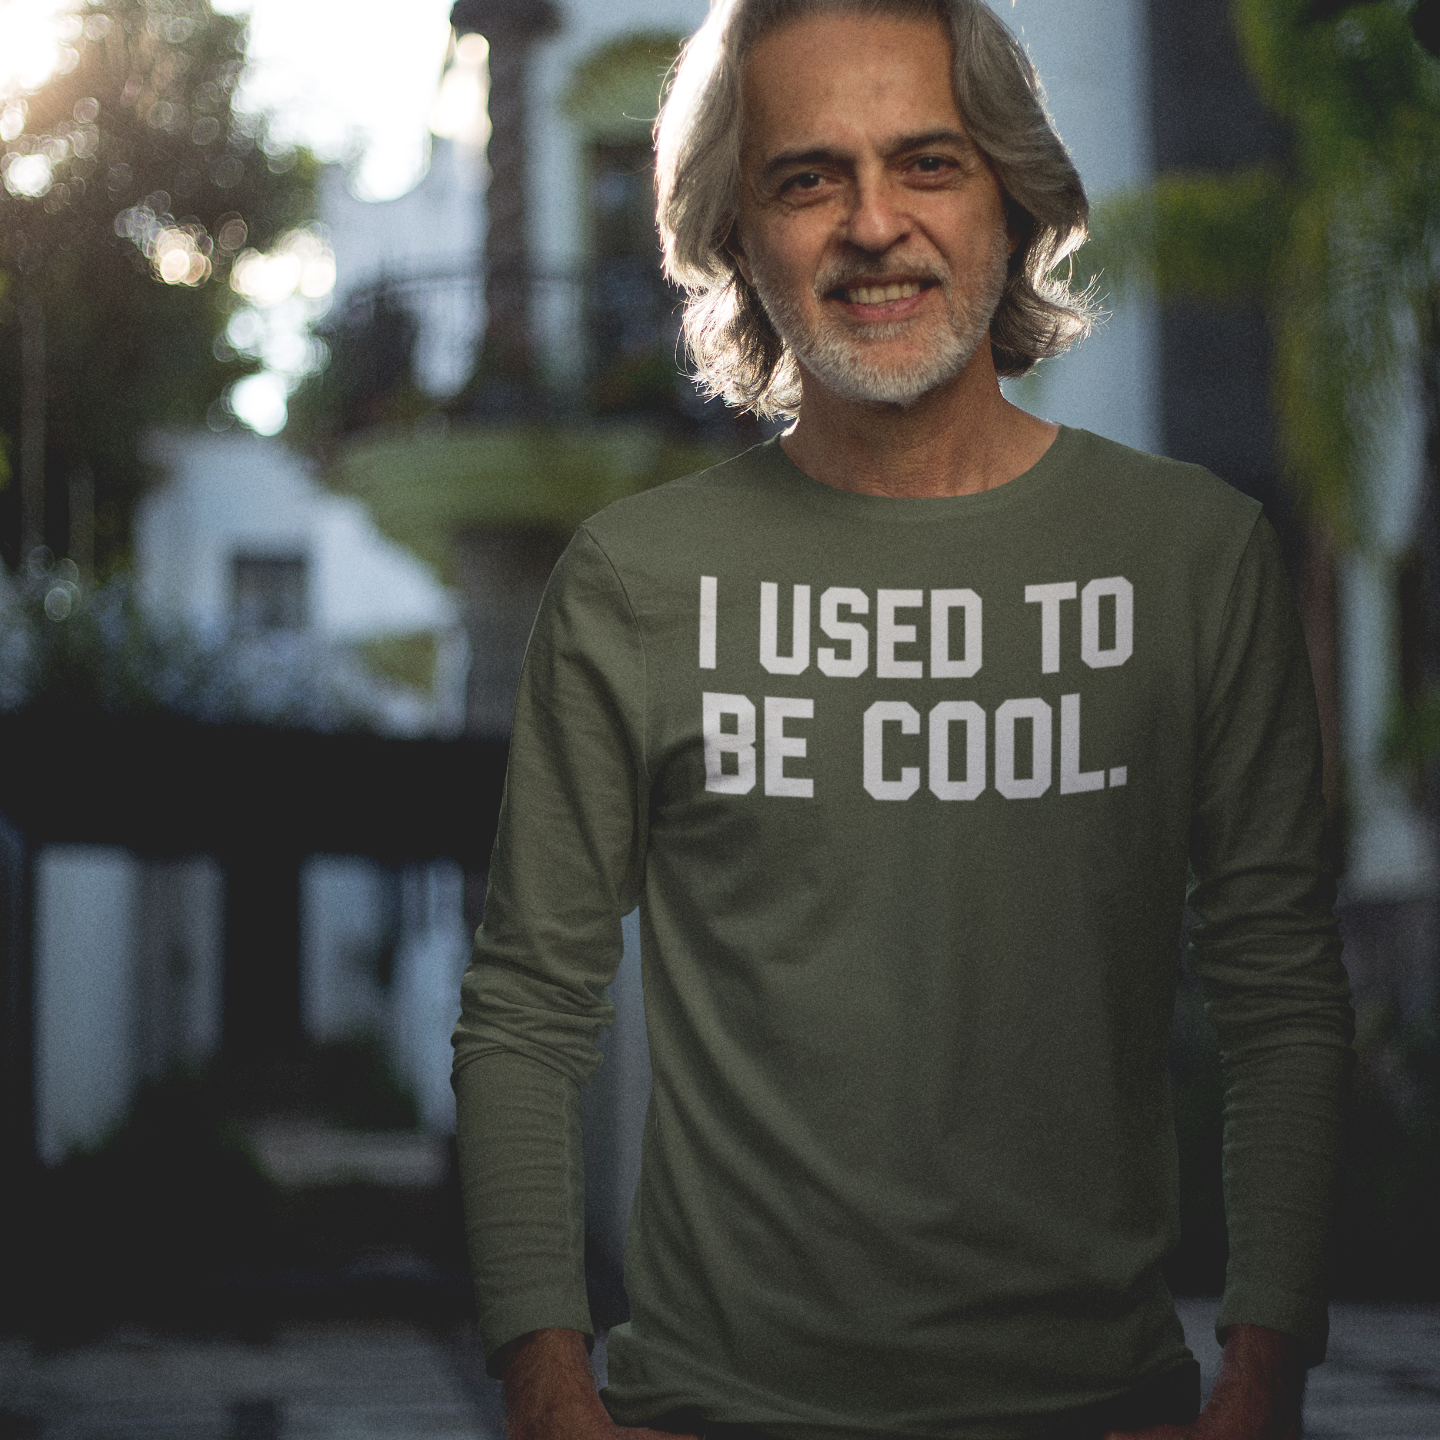 'I used to be cool.' adult longsleeve shirt